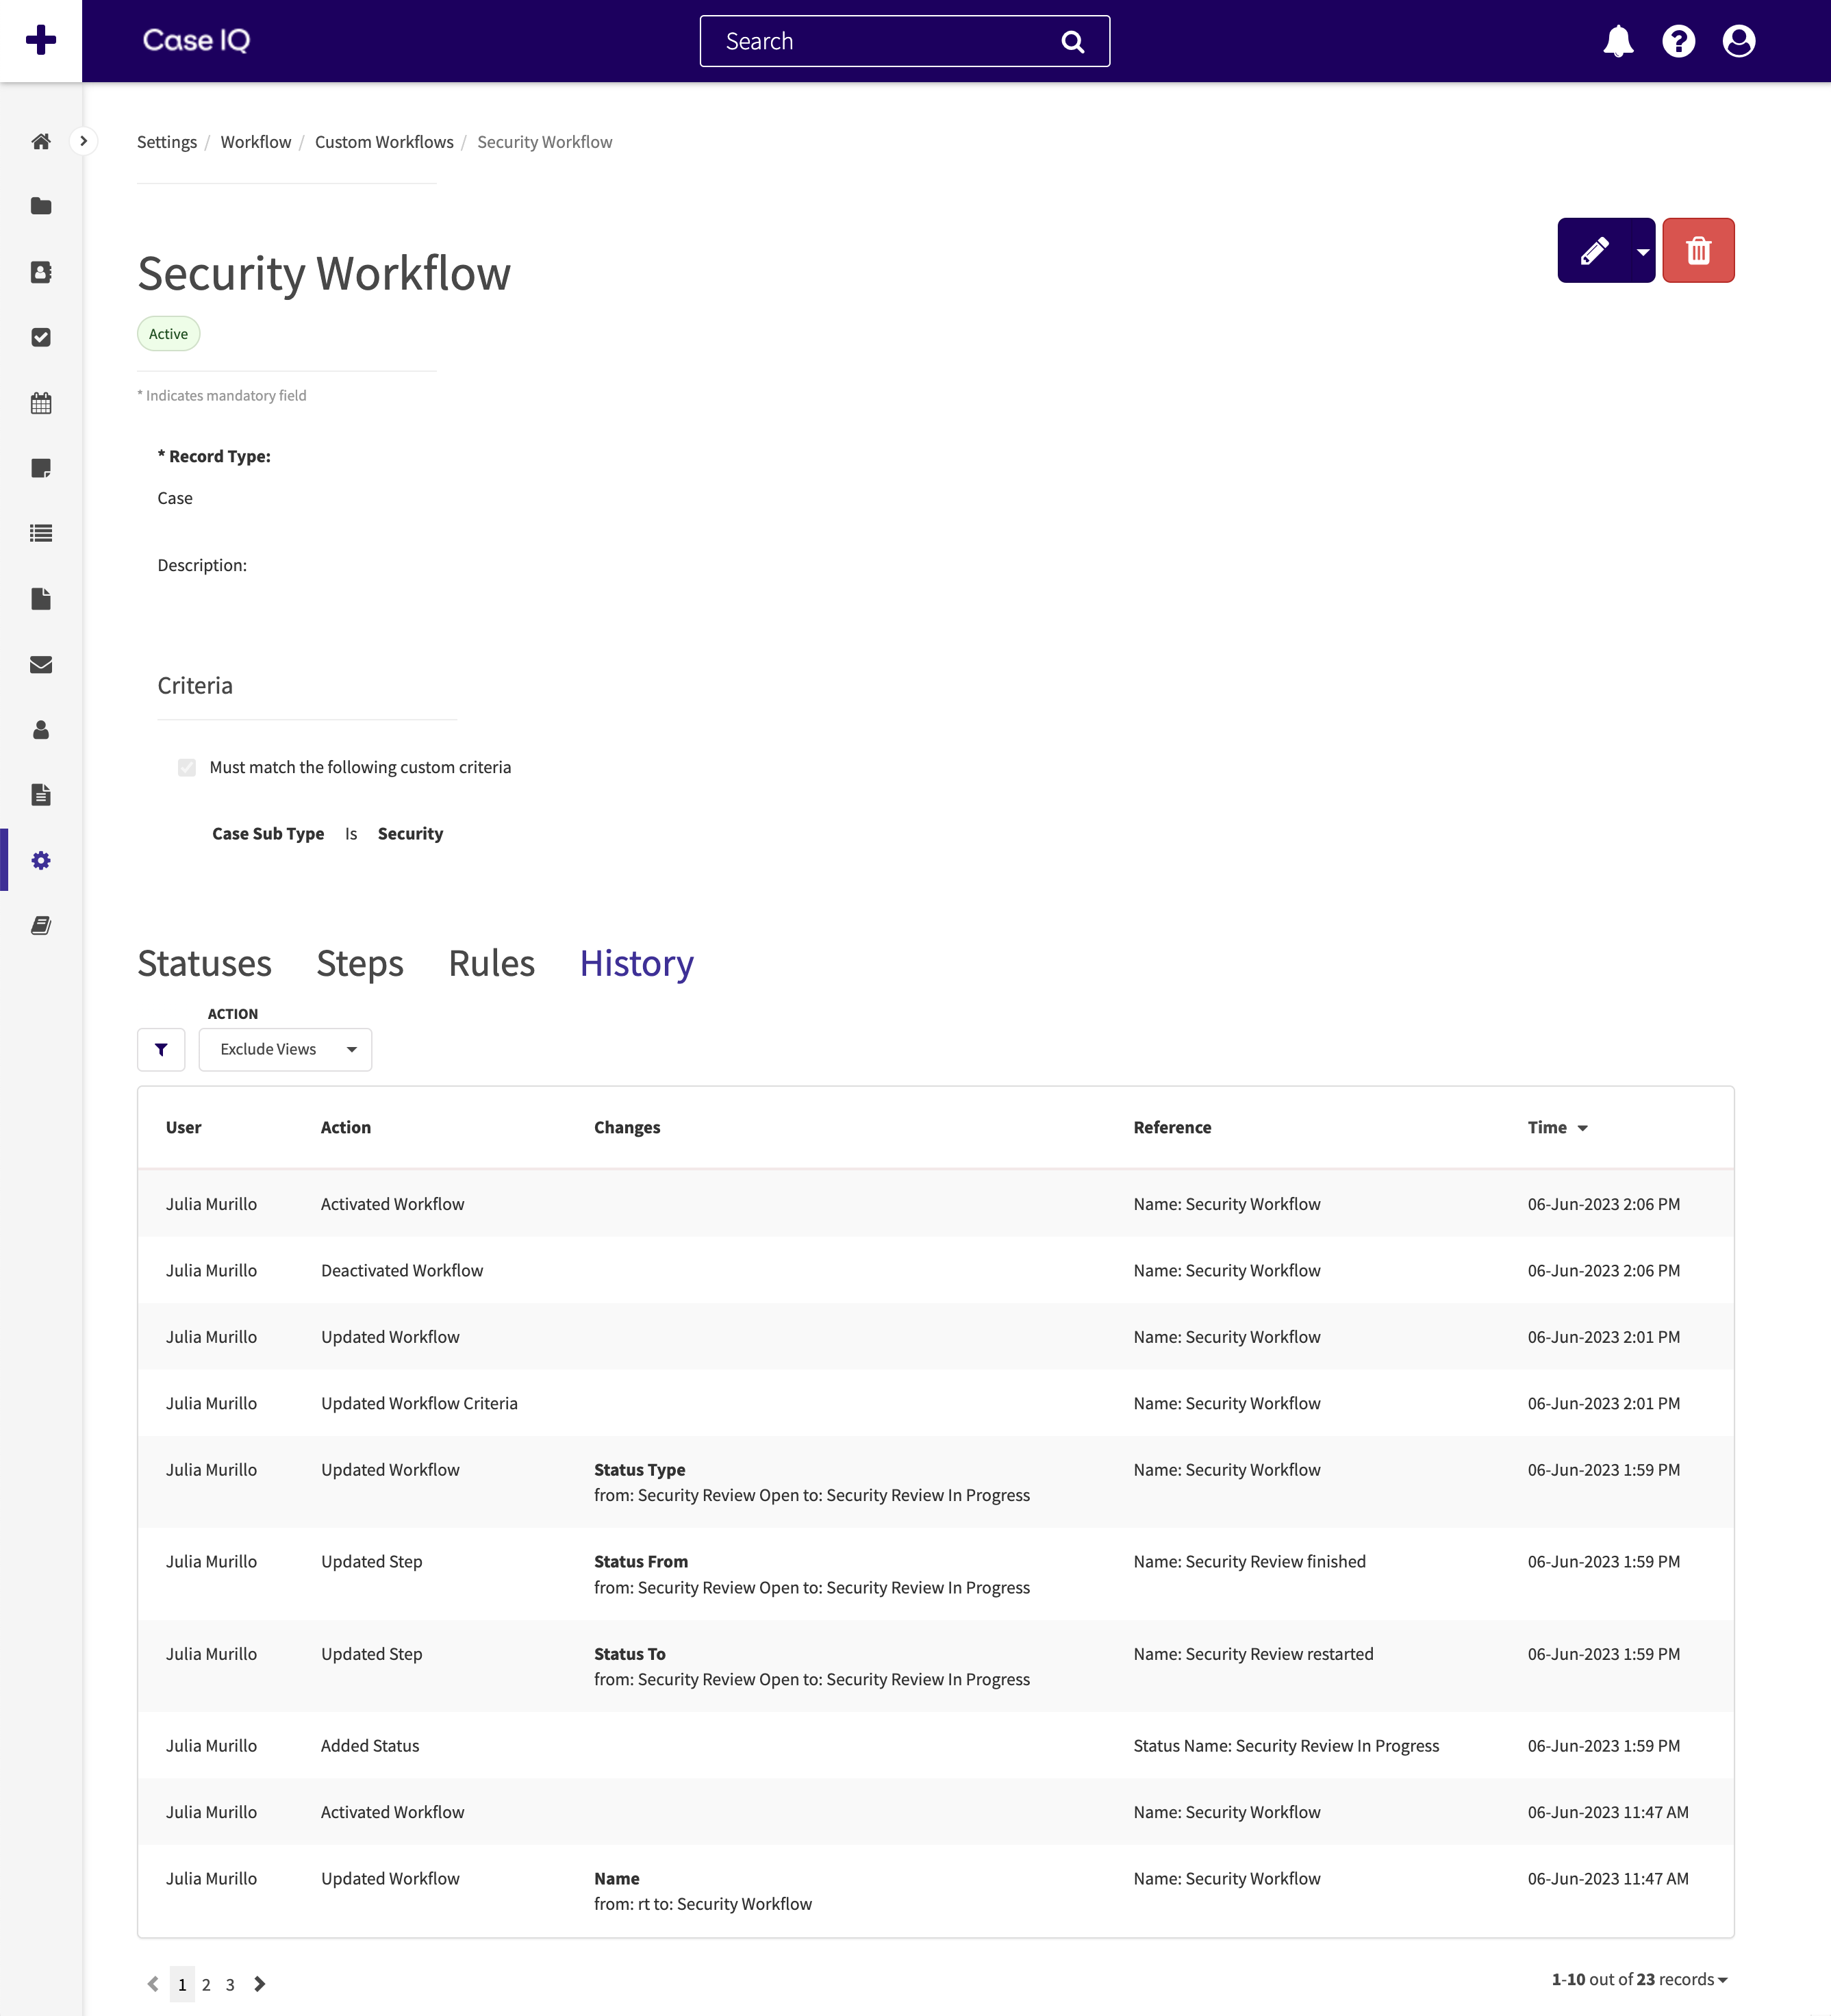 History tab on a workflow's page.